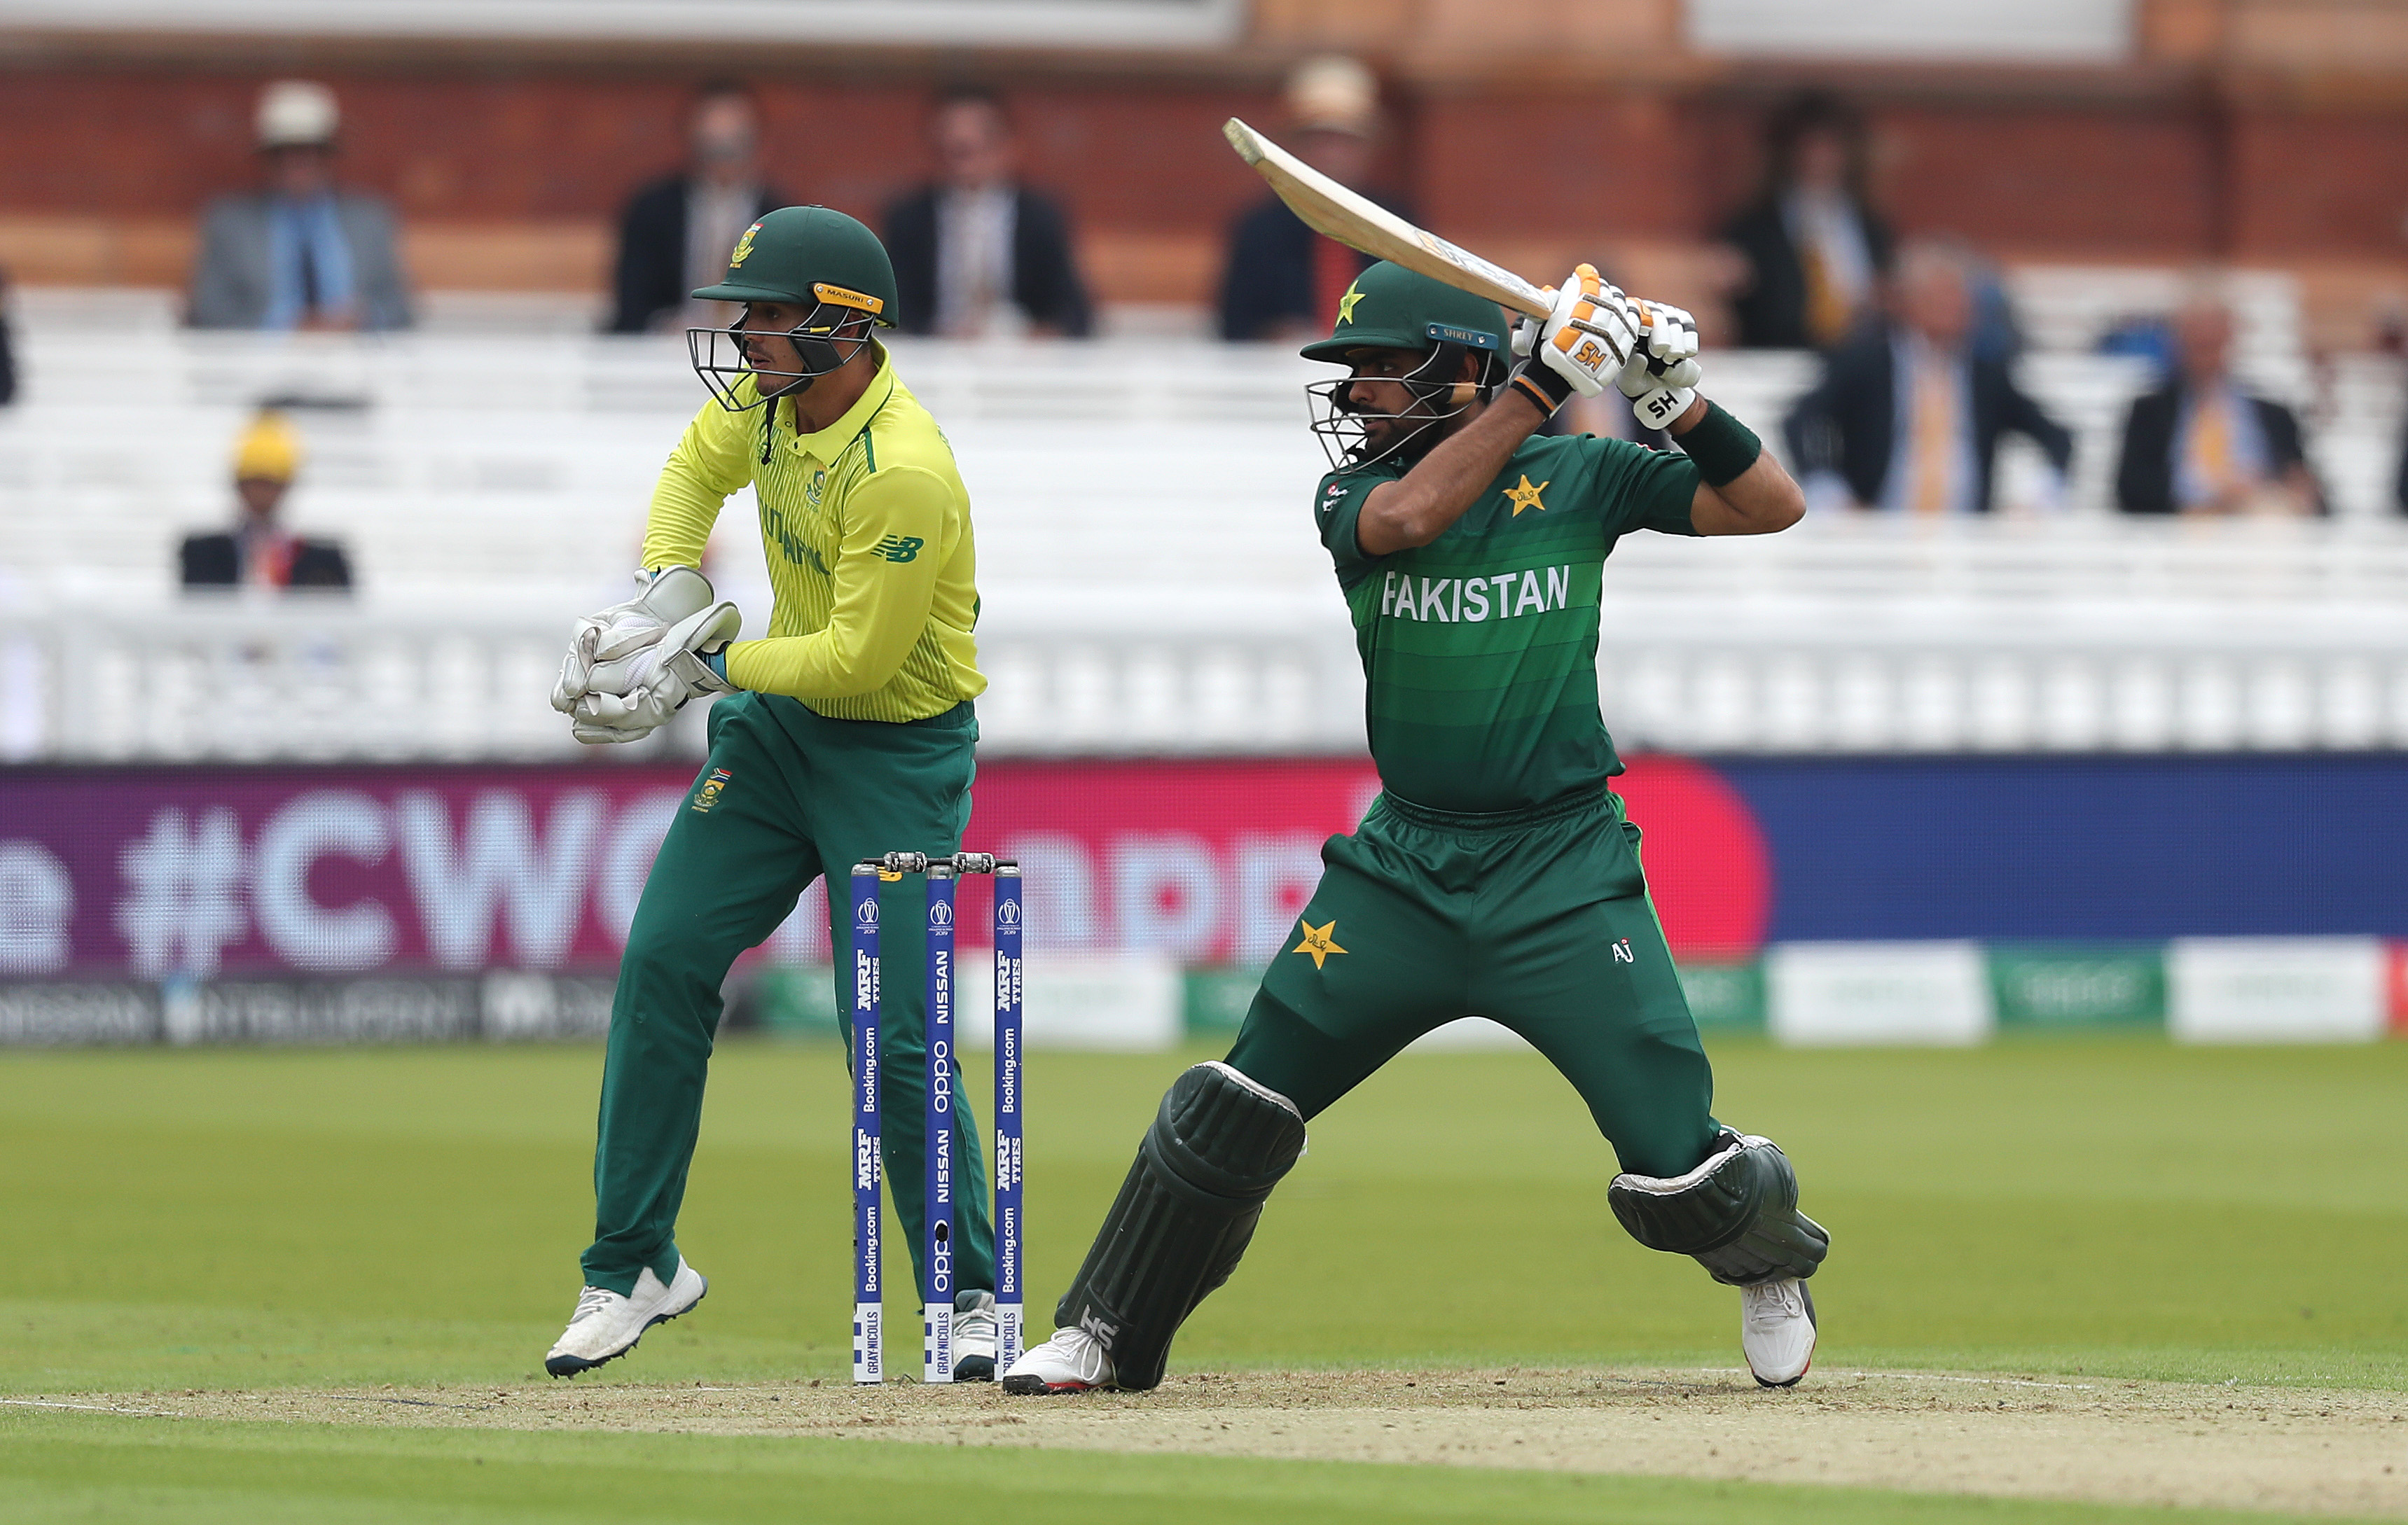 South Africa announce tour of Pakistan in early 2021